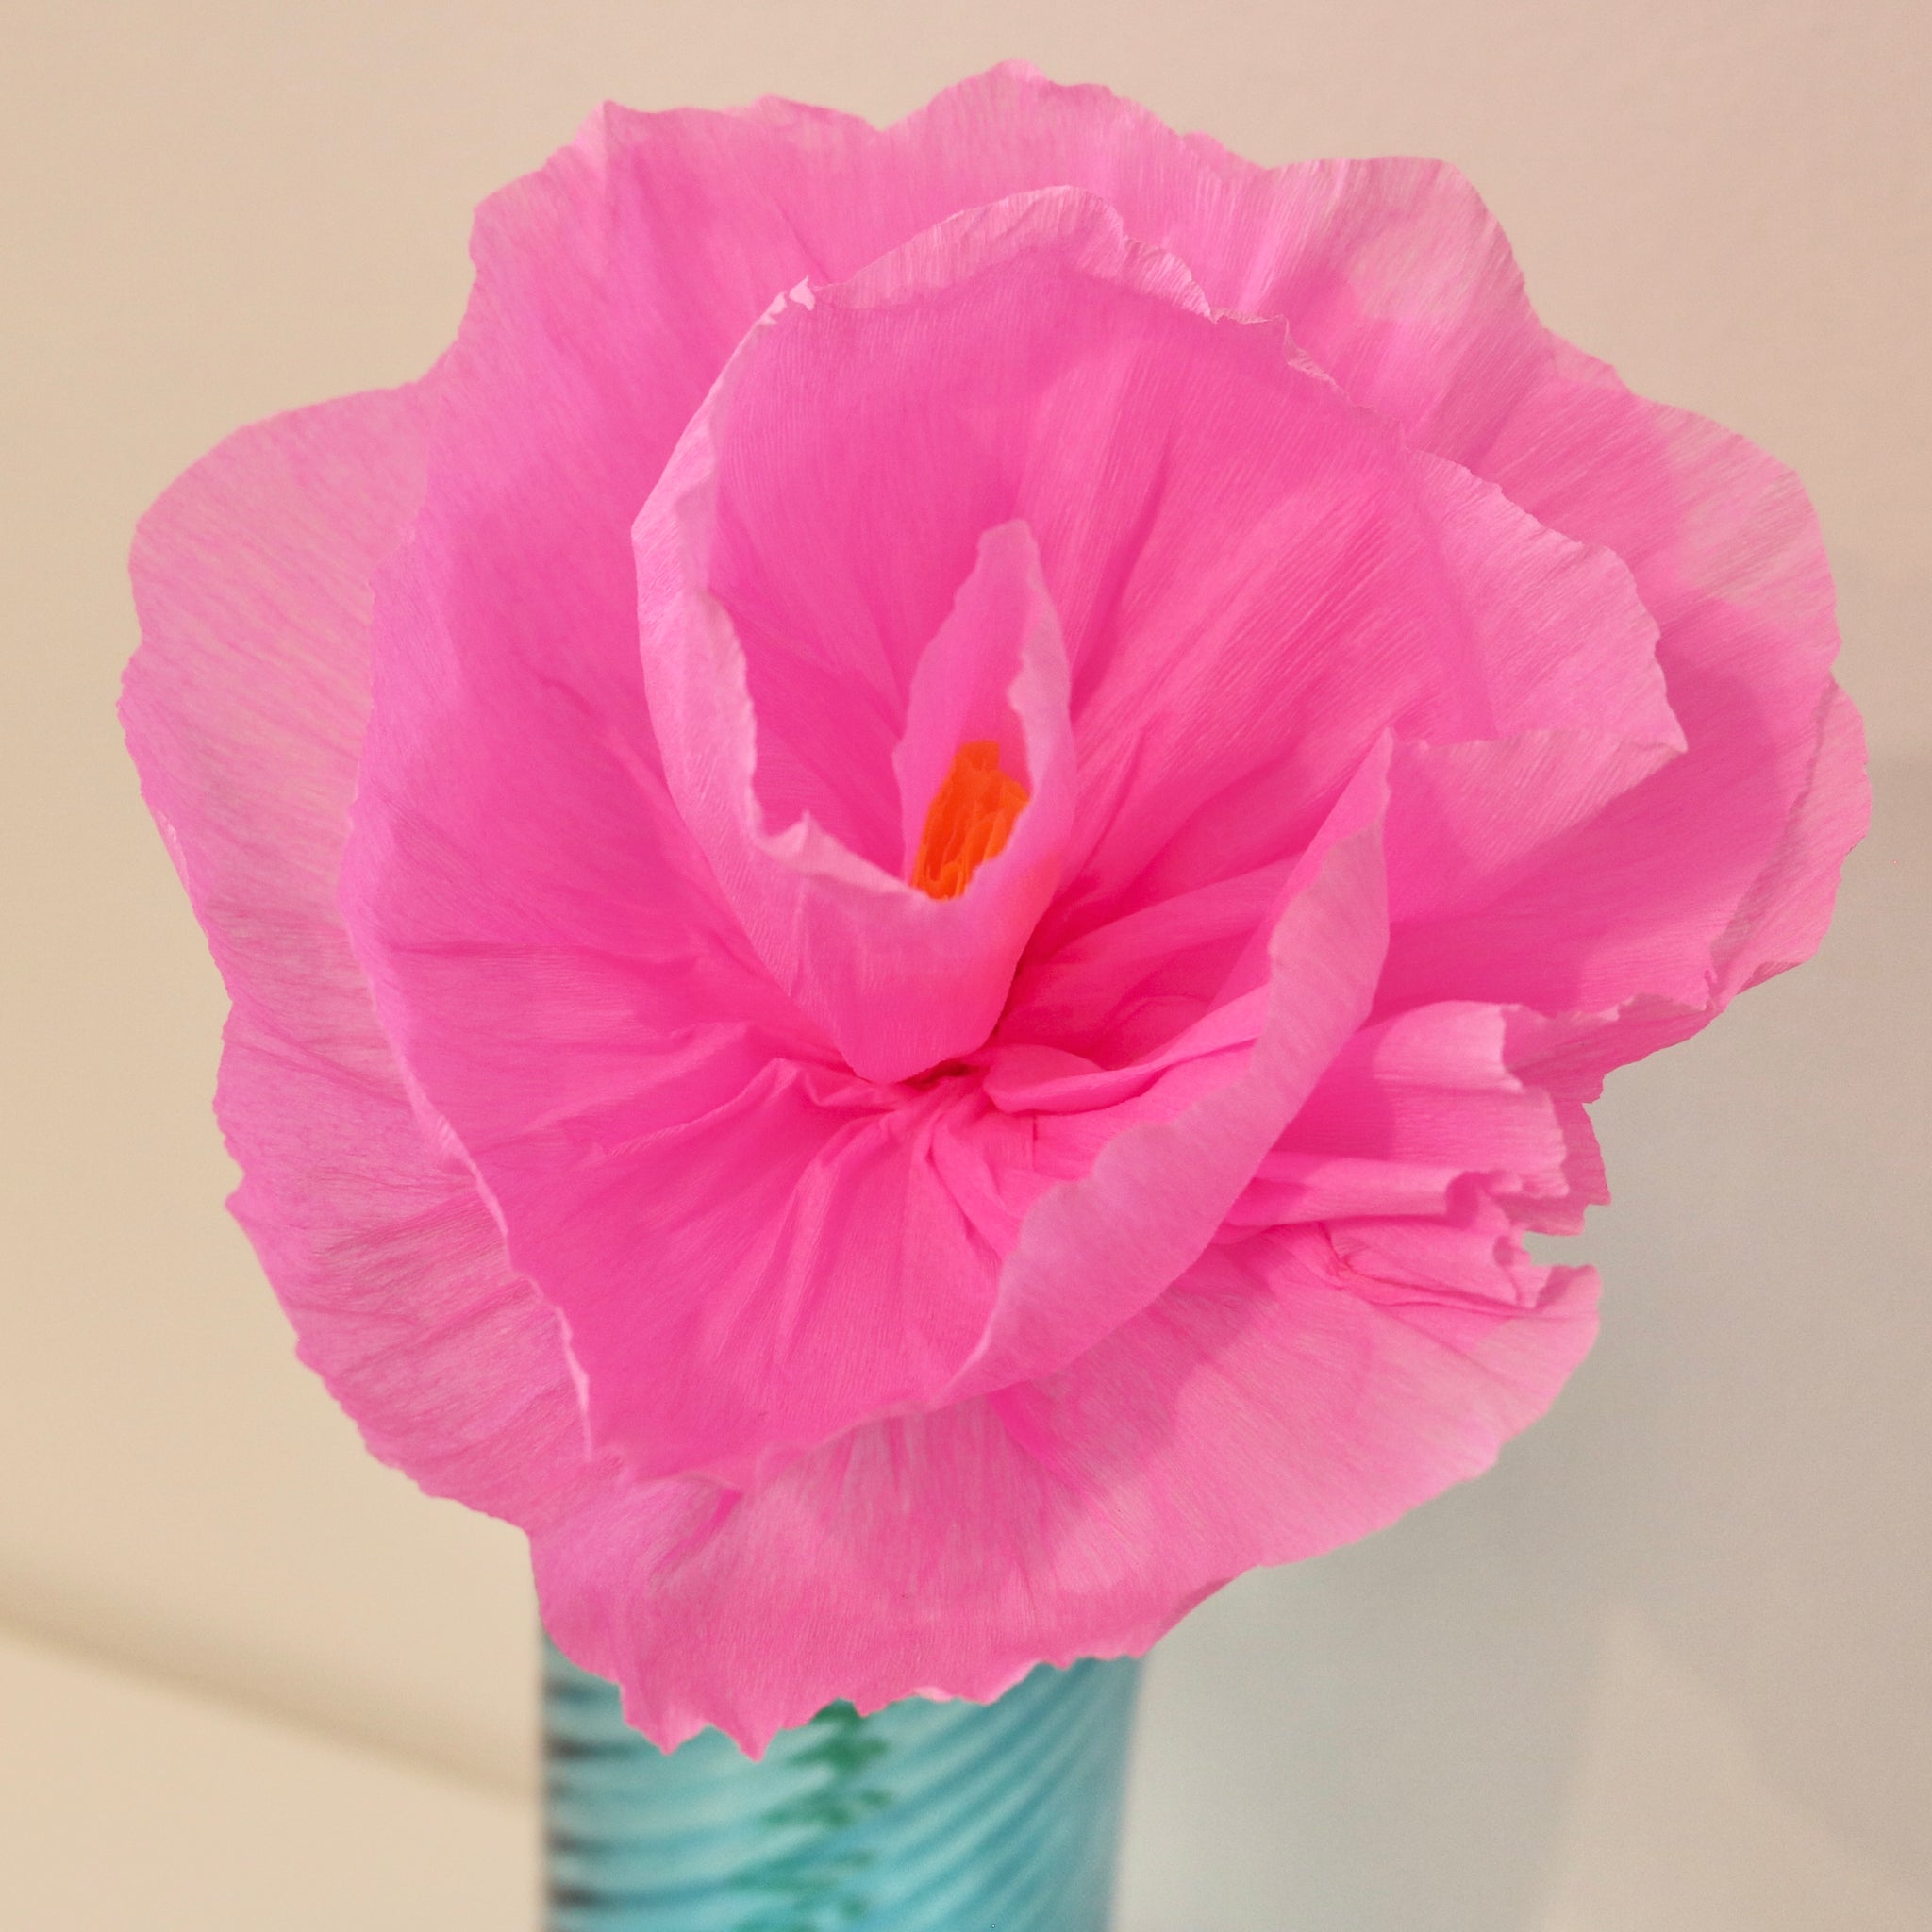 Mexican Crepe Paper Tissue Flowers - Set of 10 - My Mercado